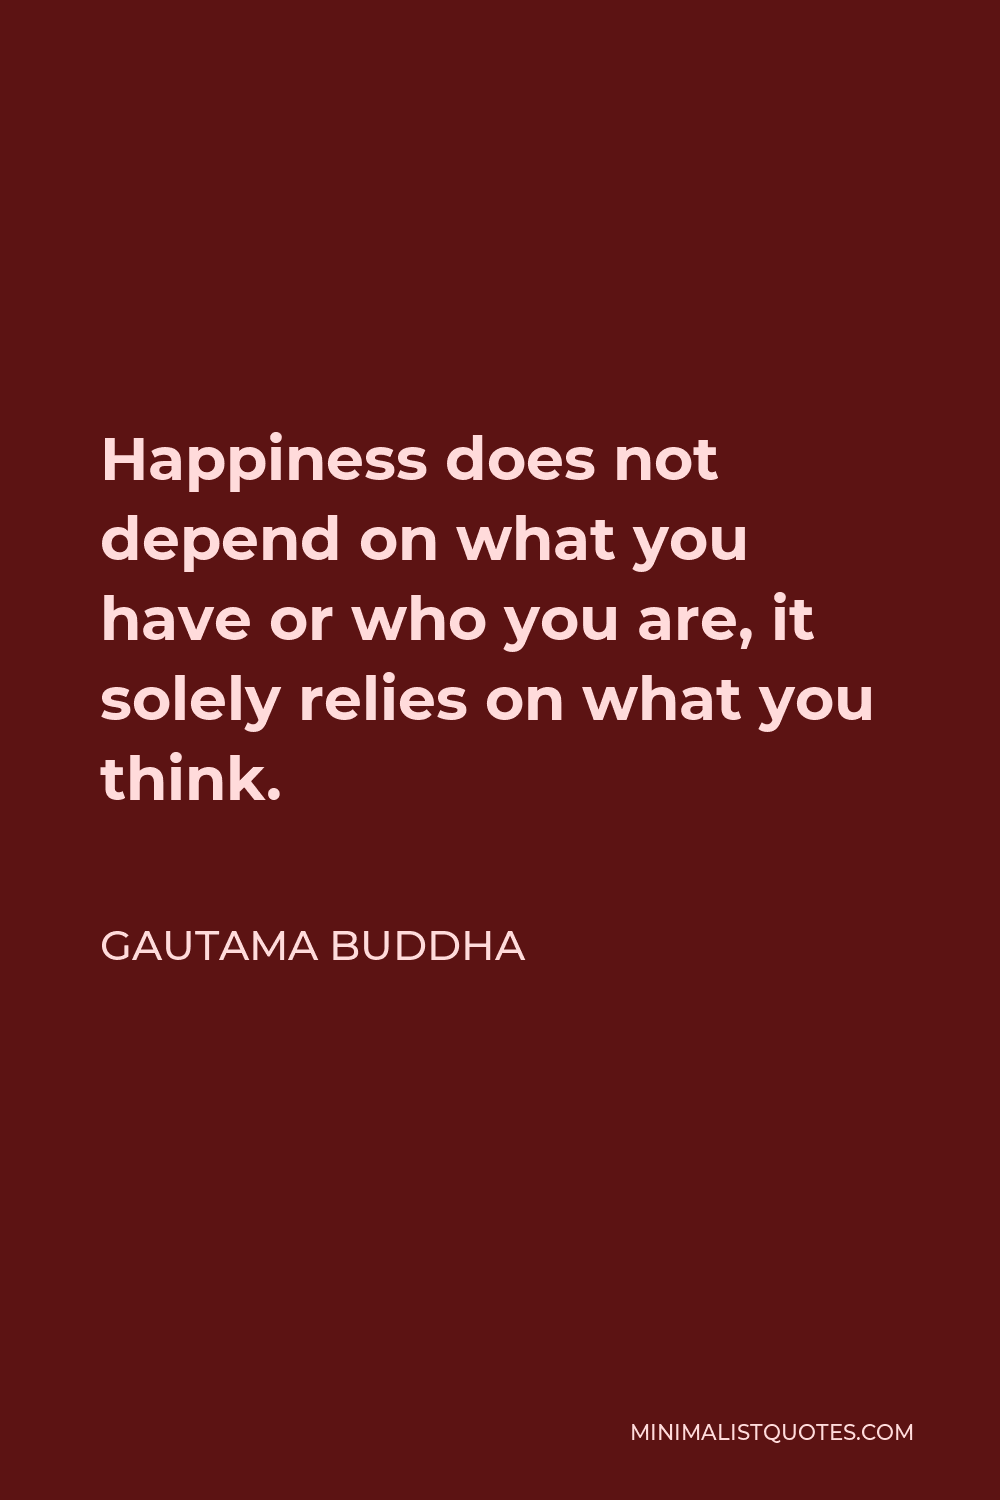 Gautama Buddha Quote - Happiness does not depend on what you have or who you are, it solely relies on what you think.